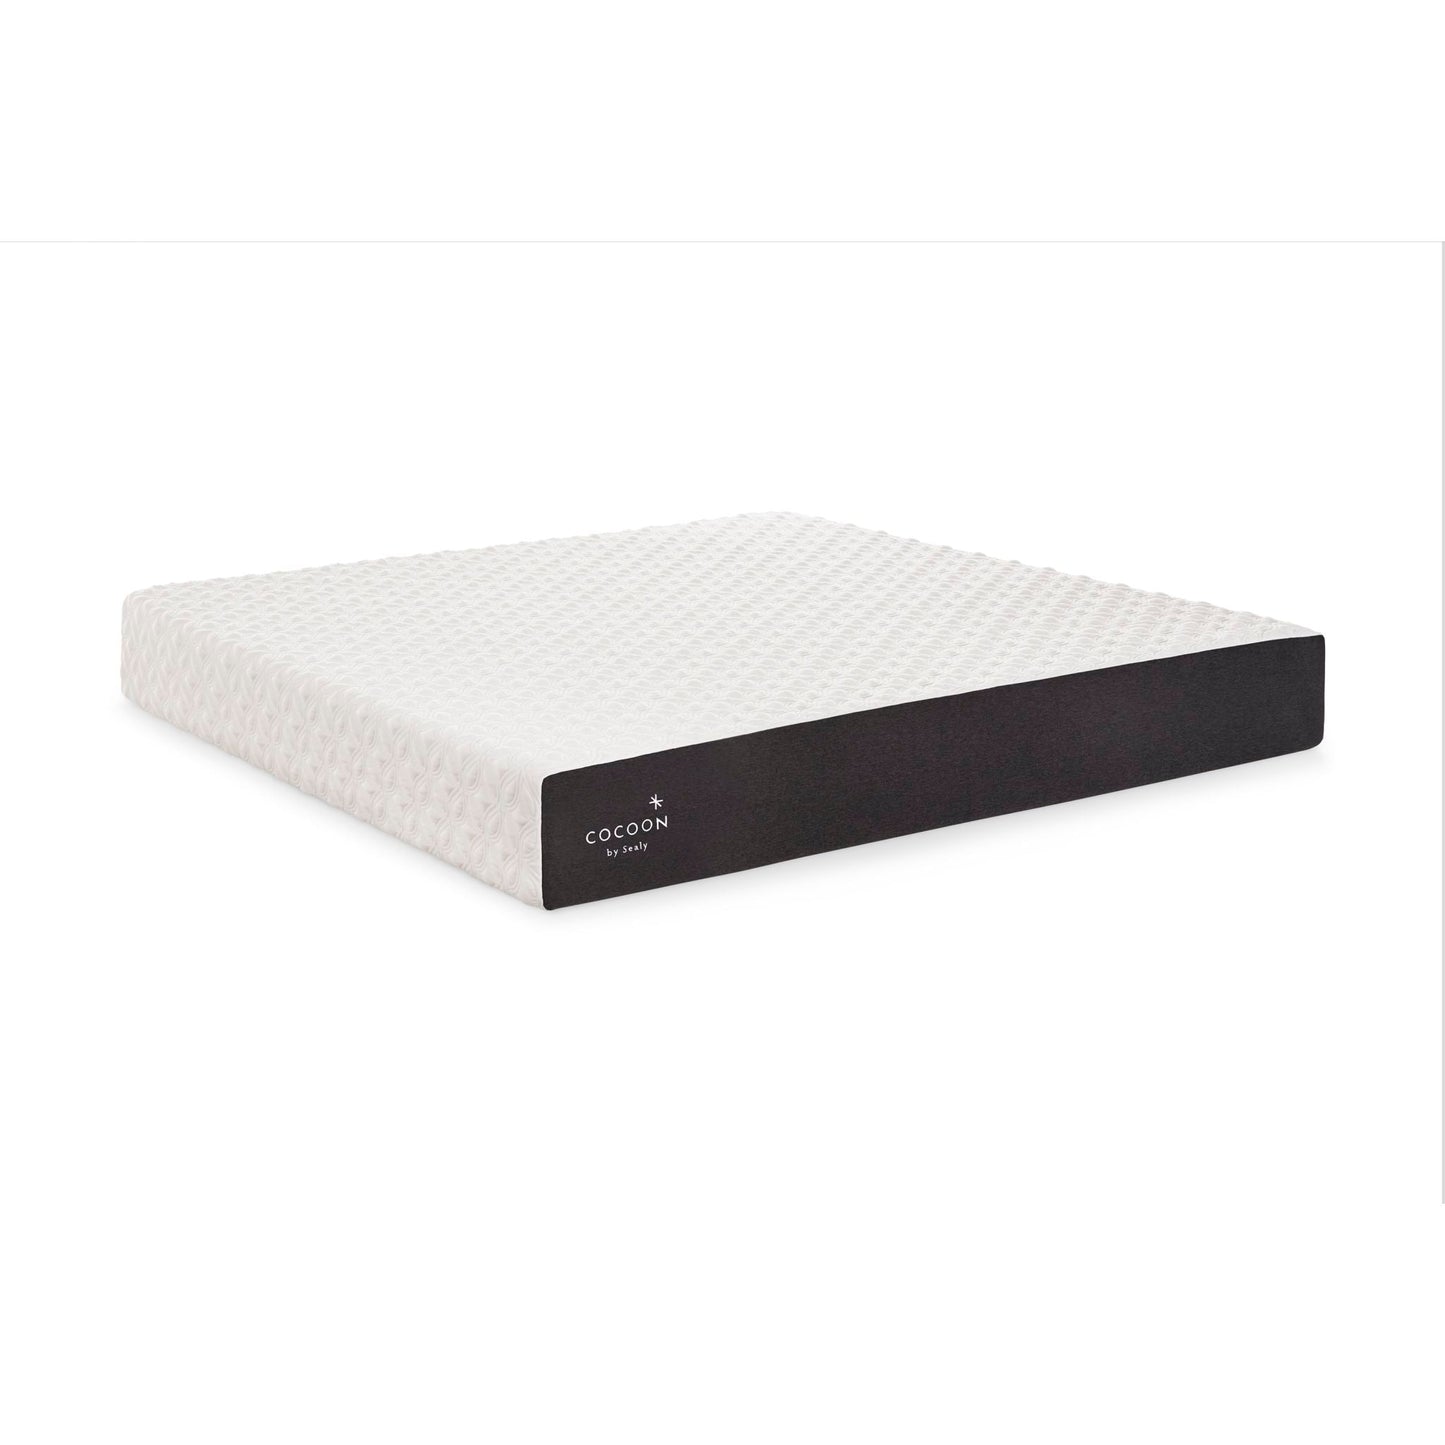 Sealy Cocoon by Sealy Classic 10" Soft Full Mattress